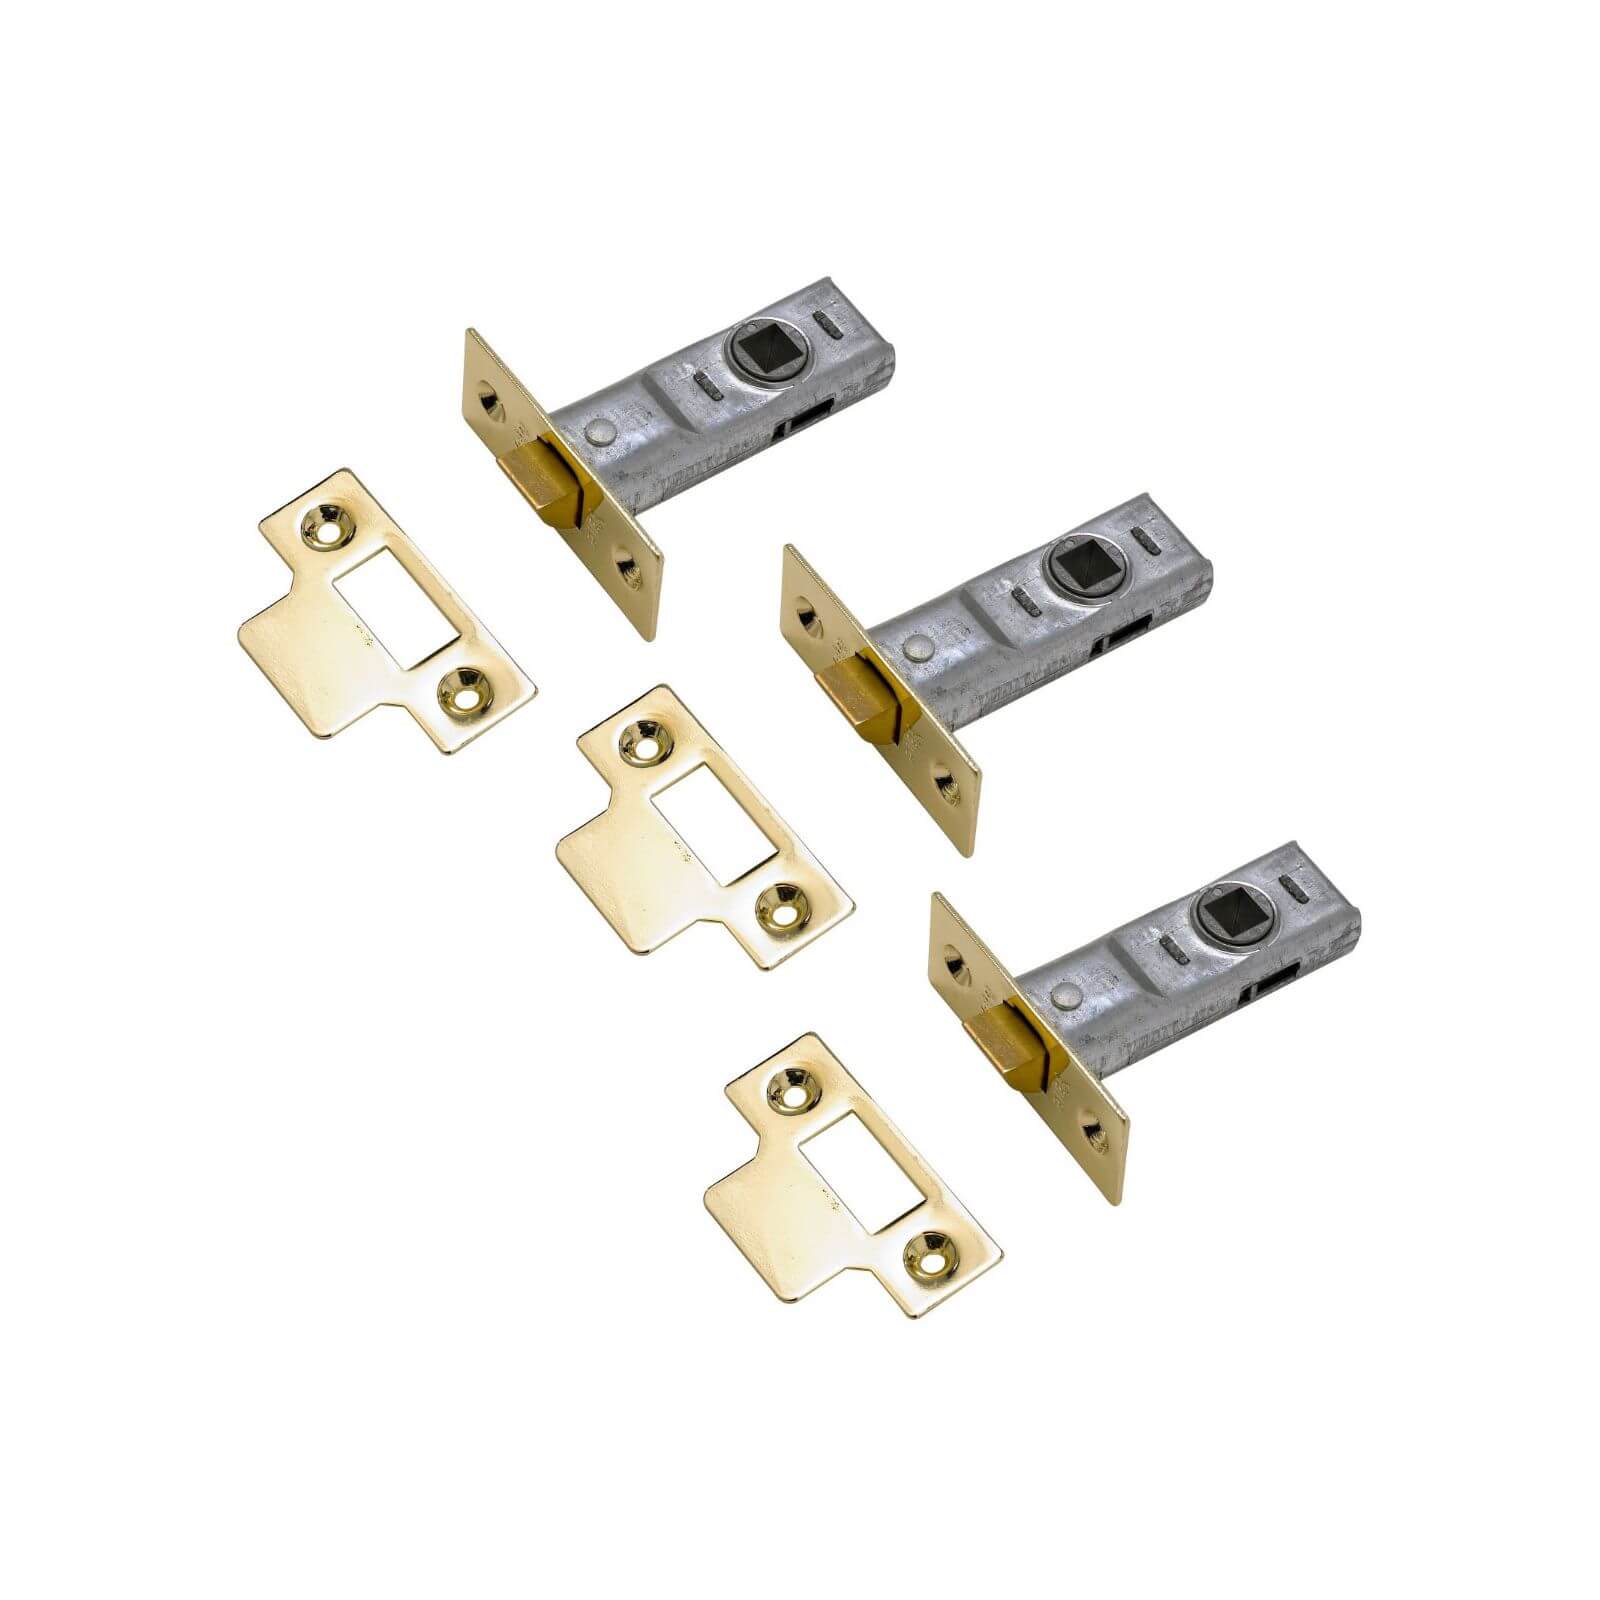 Photo of Yale Tubular Latch 64mm / 2.5 Inches - Brass - 3 Pack